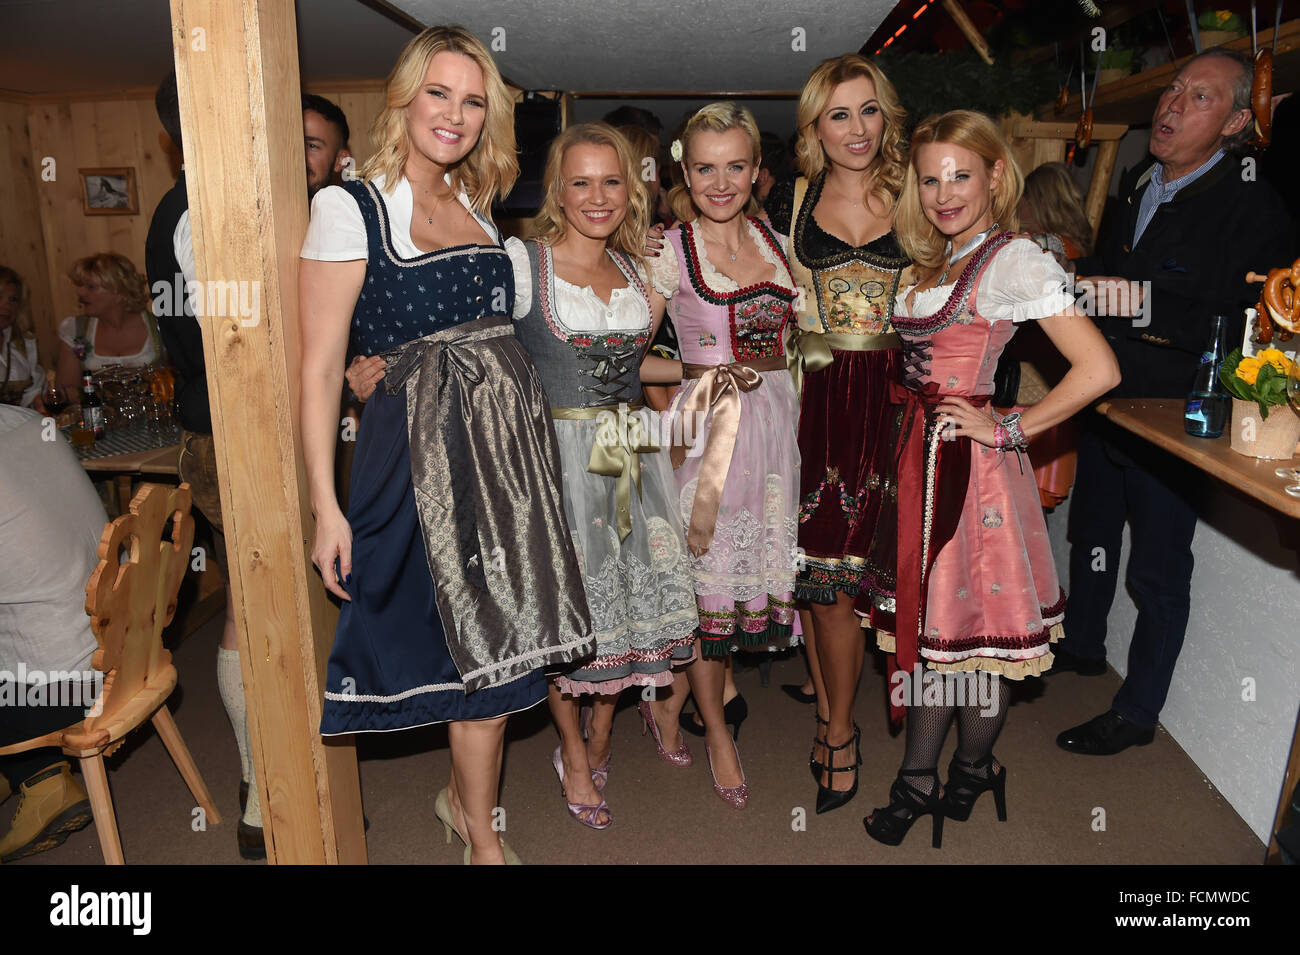 Pregnant model Monica Ivancan (l-r), TV host Nova Meierhenrich, doctor Barbara Sturm, TV host Verena Kerth and designer Sonja Kiefer posing at the 25th Weisswurst party at Stanglwirt hotel in Going, Austria, 22 January 2016. Photo: Felix Hoerhager/dpa Stock Photo